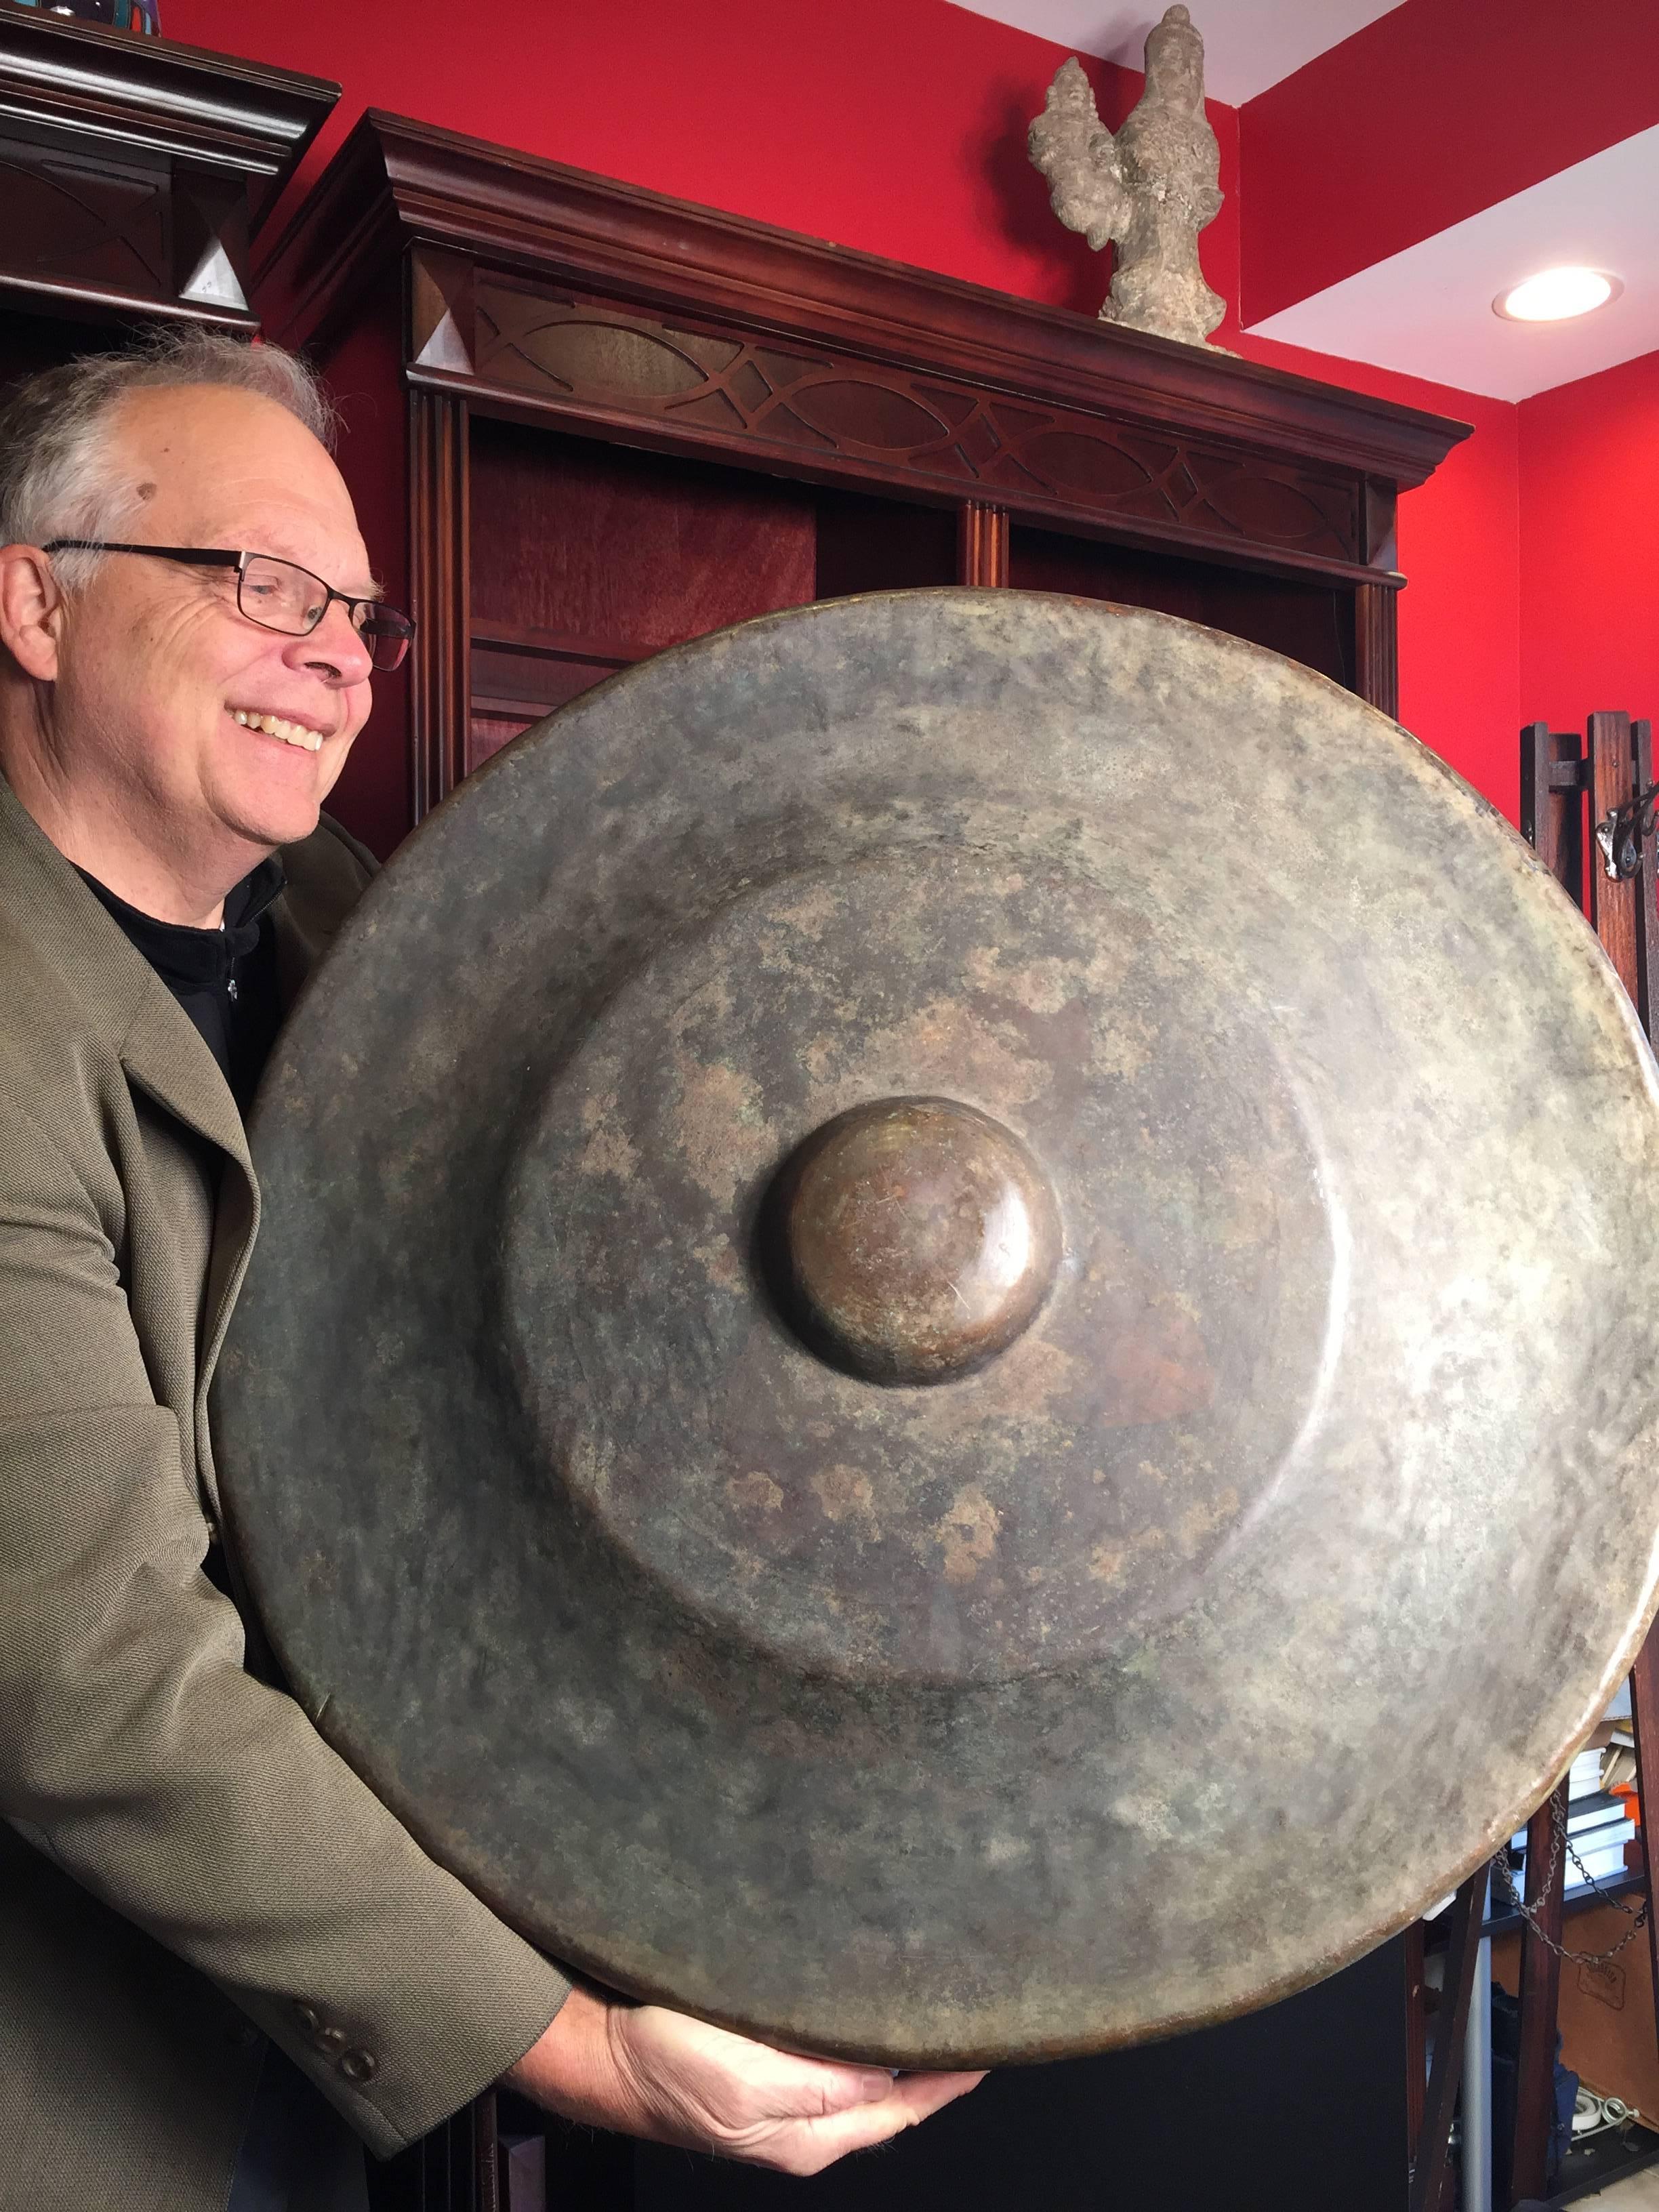 Here's a very nice large-scale 19th century bronze garden temple gong with striker which we just found in an old Kyoto collection.

Dimensions: substantial  29 inches diameter and comes complete with an old striker.

Hand made and hand cast antique